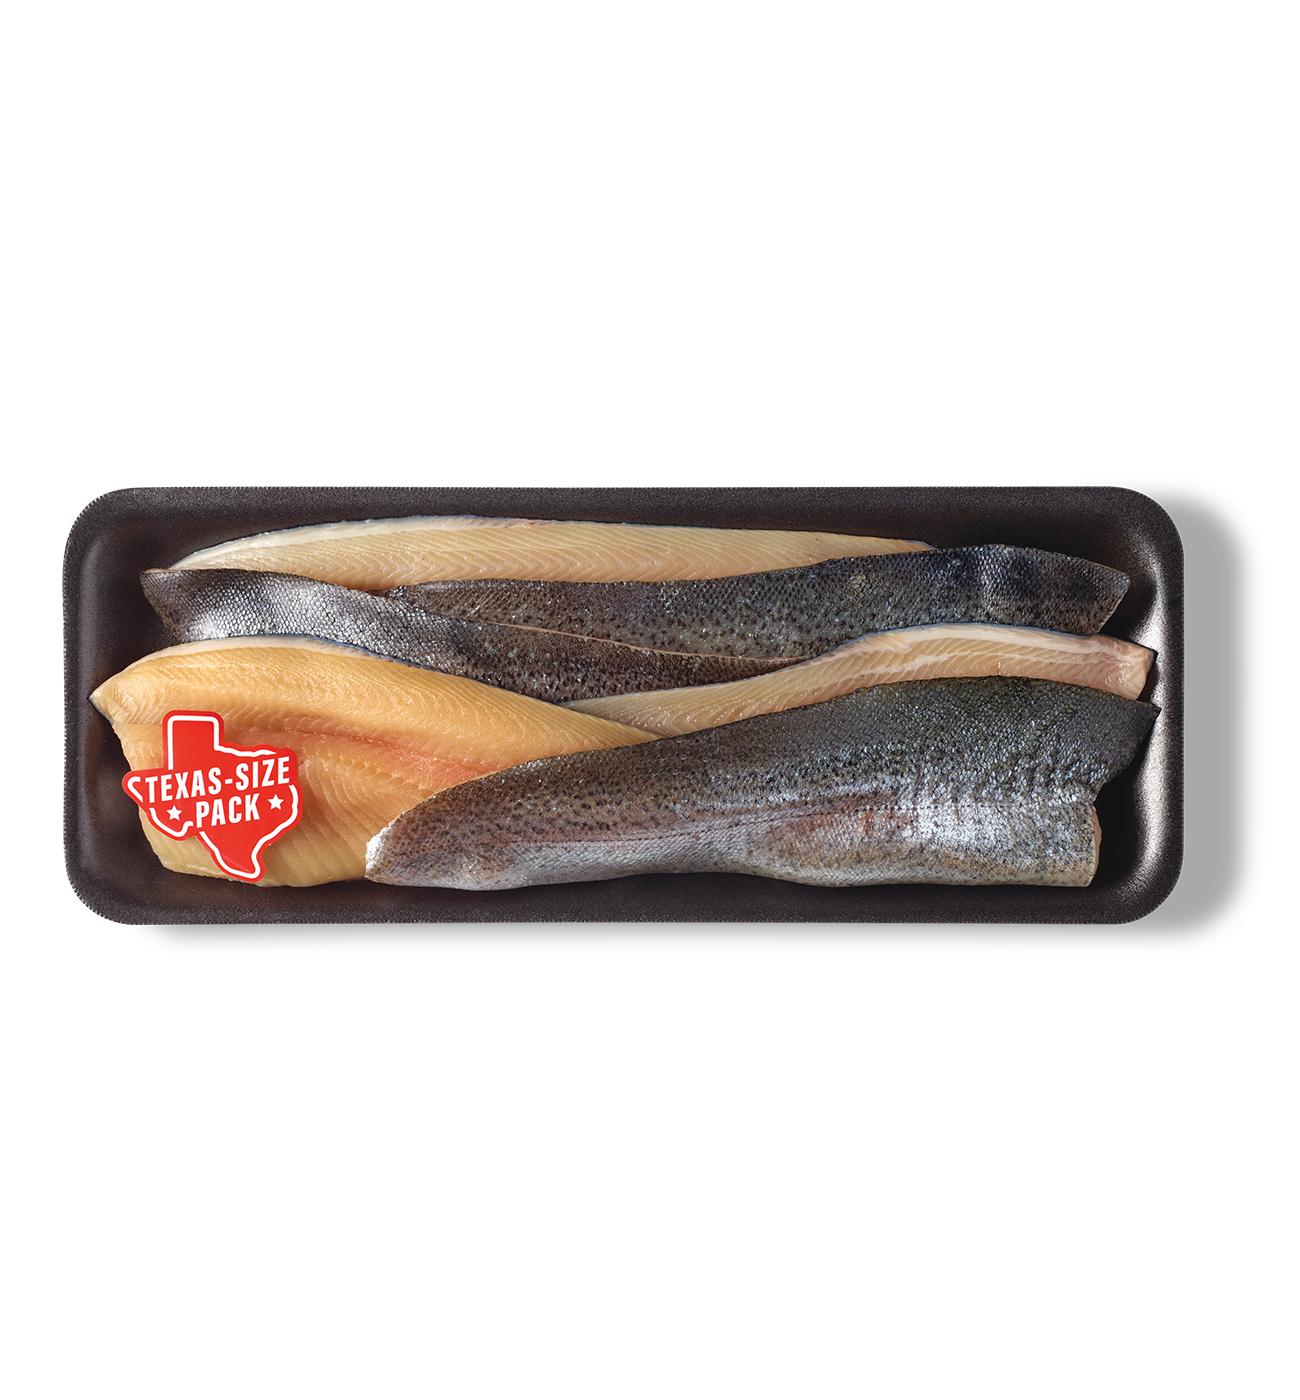 H-E-B Fish Market Fresh Rainbow Trout Fillets - Texas-Size Pack; image 1 of 2